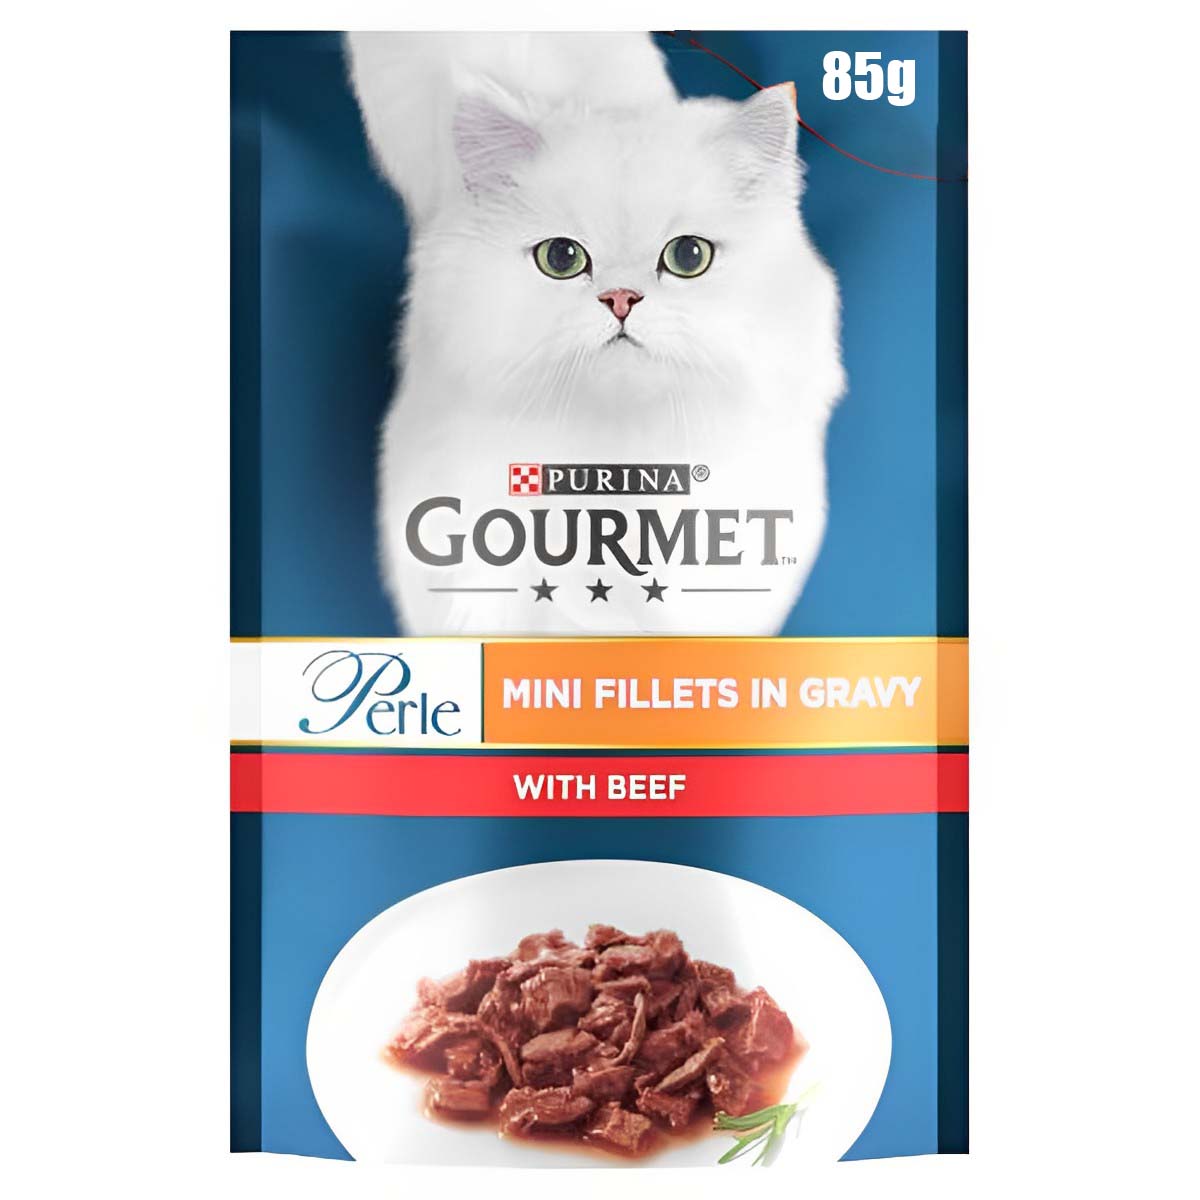 Gourmet - Perle Mini Fillets in Gravy with Beef Cat Food - 85g - Continental Food Store